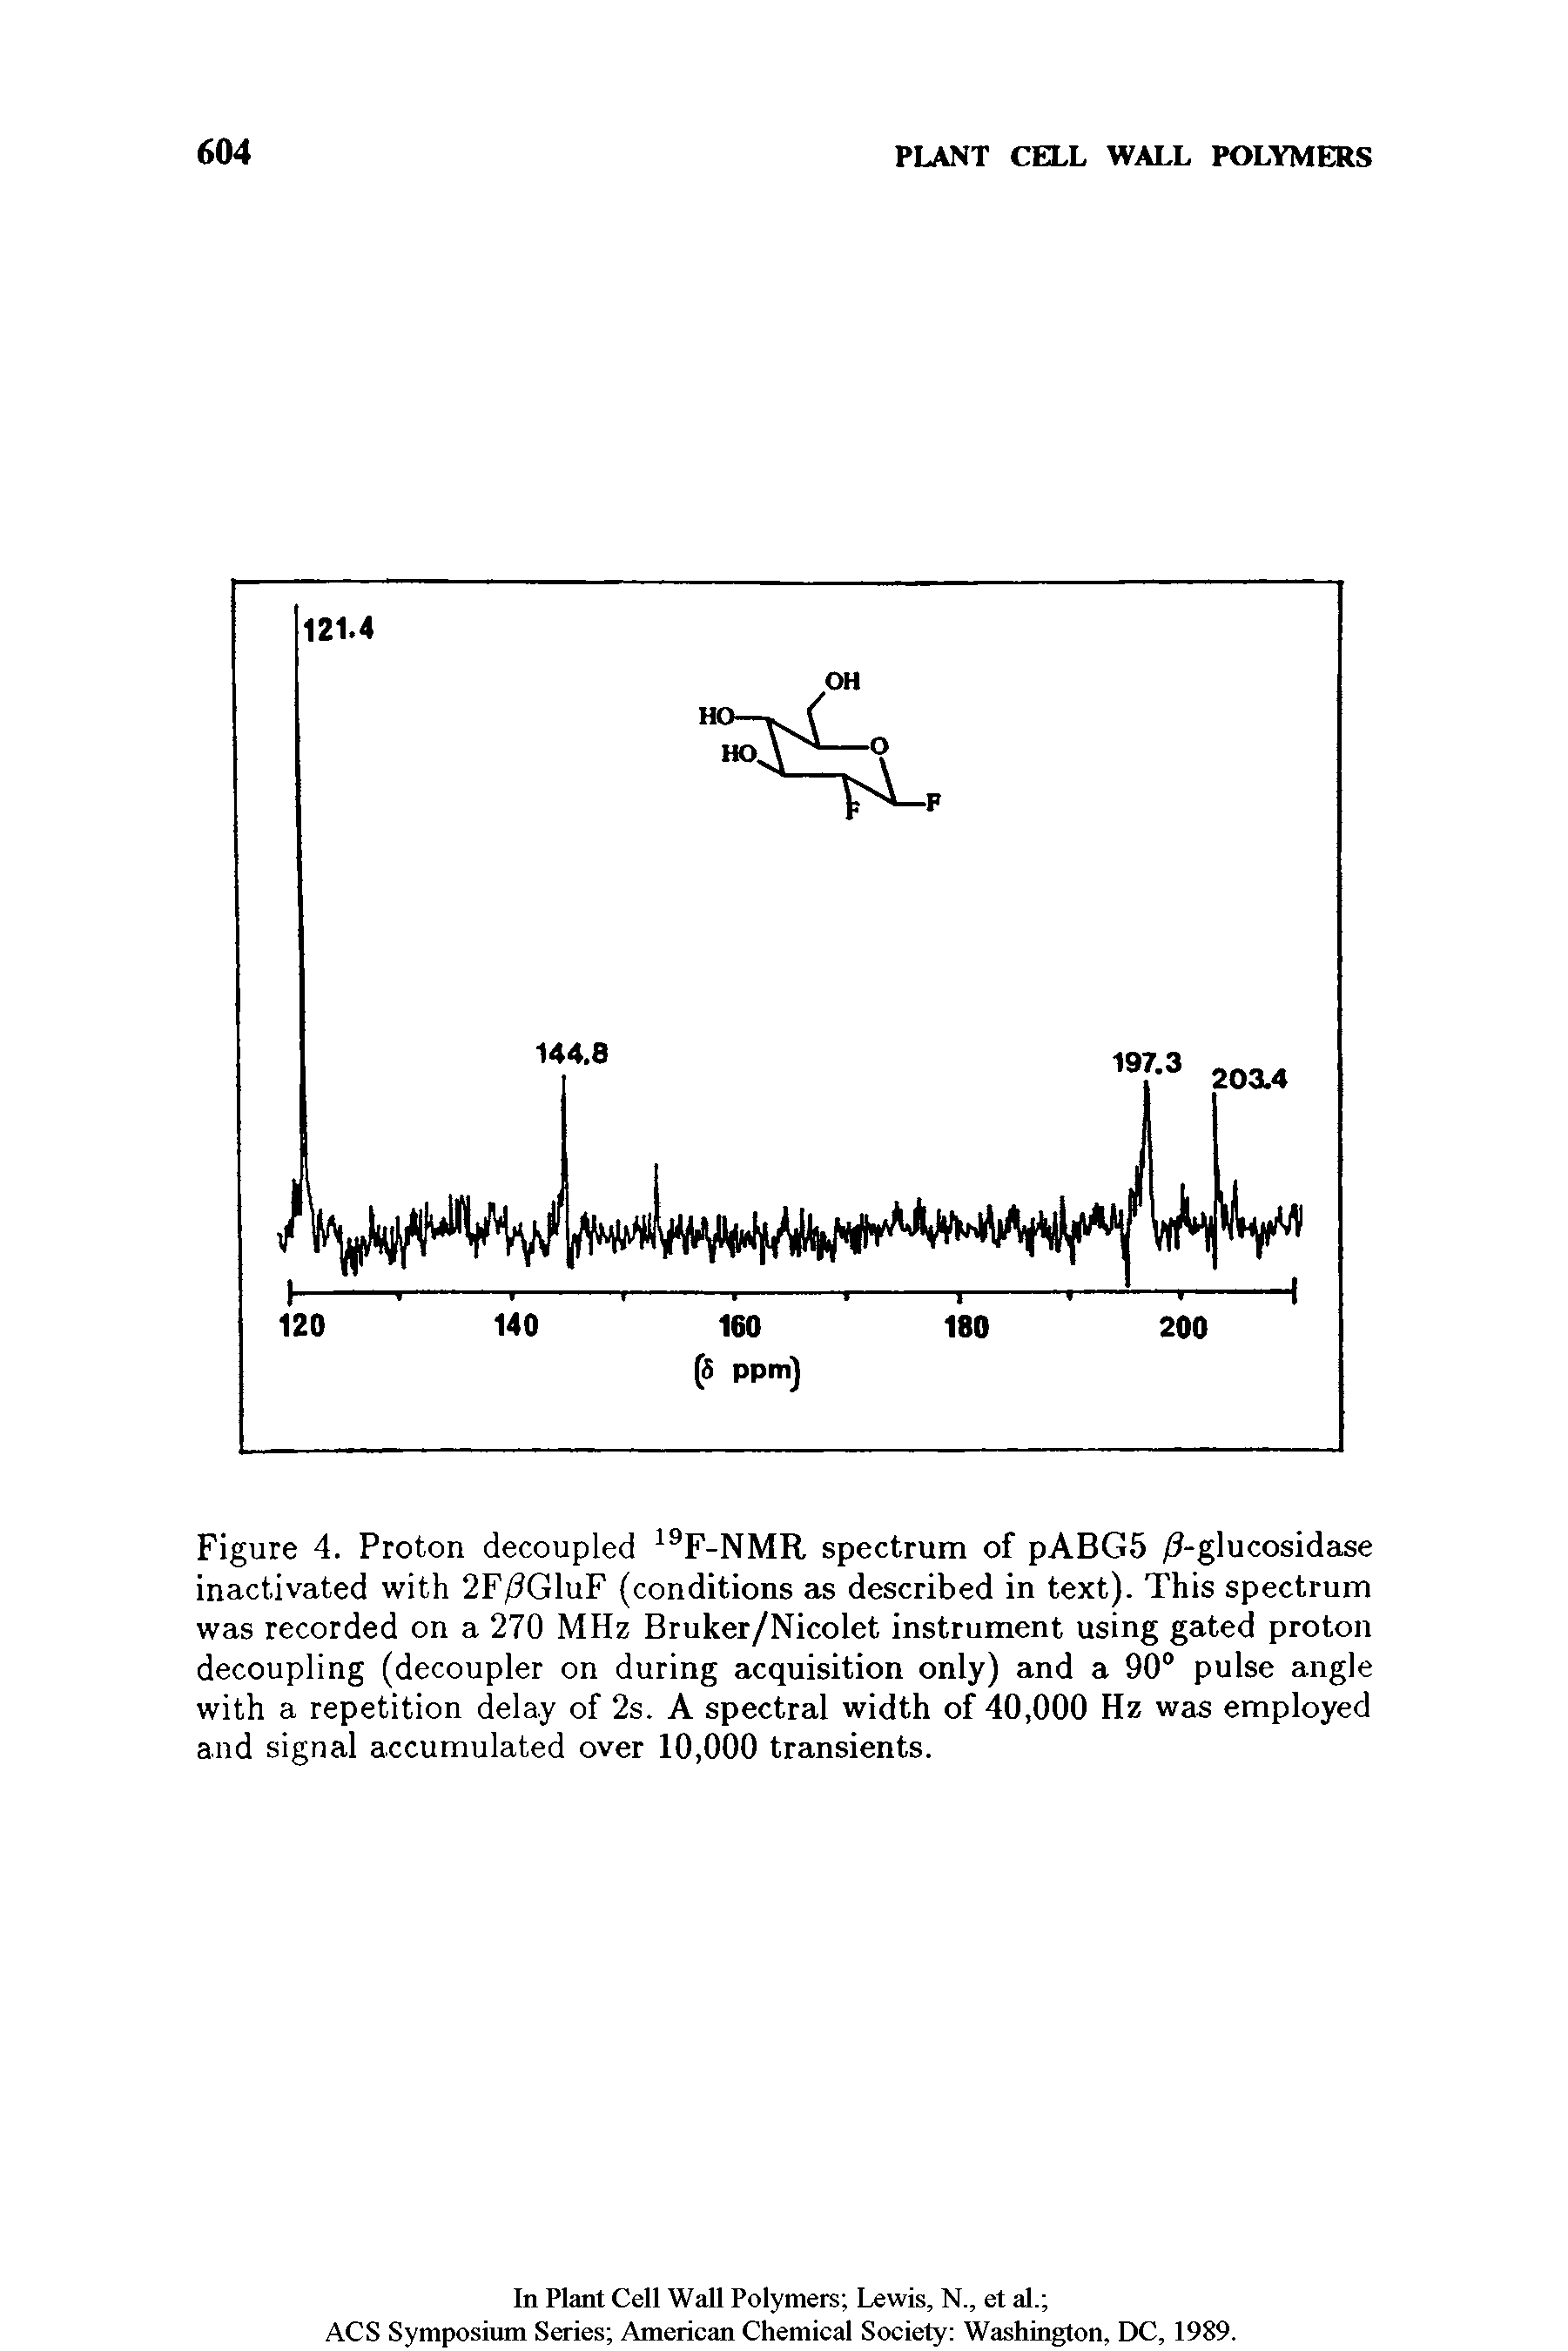 Figure 4. Proton decoupled 19F-NMR spectrum of pABG5 /7-glucosidase inactivated with 2F/ GluF (conditions as described in text). This spectrum was recorded on a 270 MHz Bruker/Nicolet instrument using gated proton decoupling (decoupler on during acquisition only) and a 90° pulse angle with a repetition delay of 2s. A spectral width of 40,000 Hz was employed and signal accumulated over 10,000 transients.